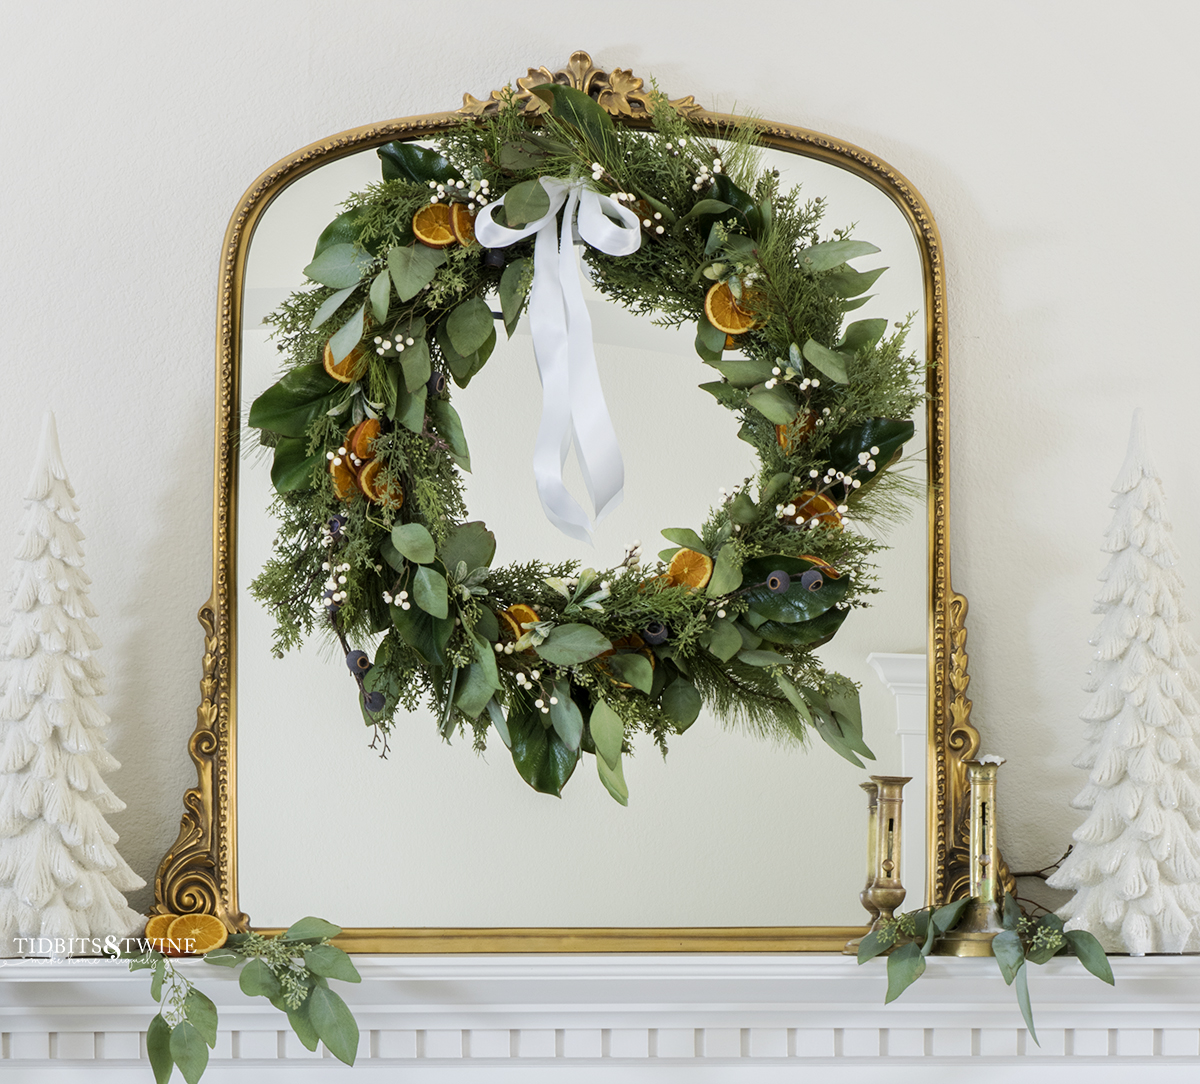 dried orange slice Christmas wreath with greenery and berries on a gold mantel above a fireplace